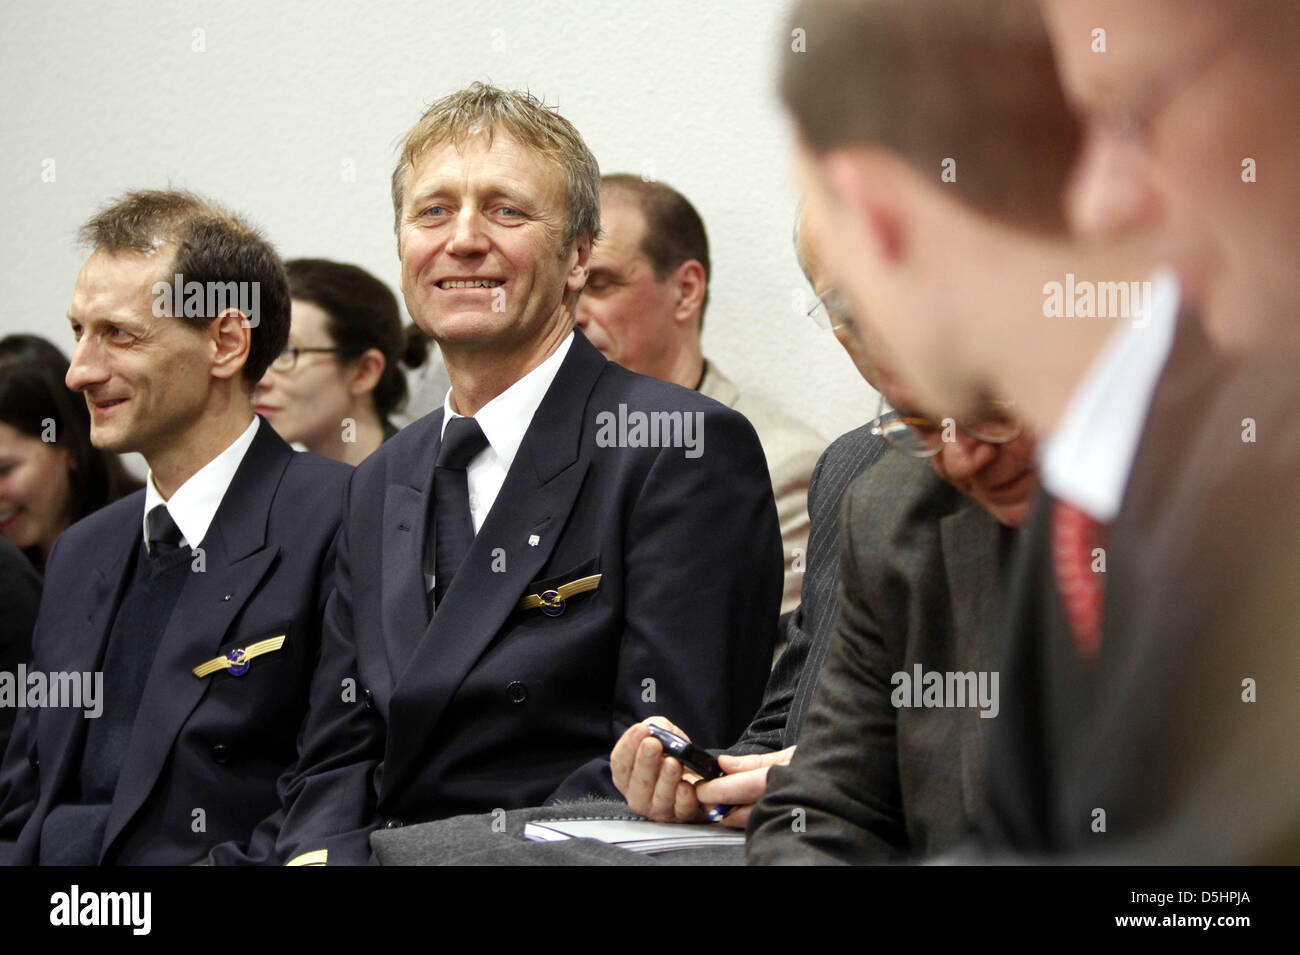 The chairmen of pilots' union 'Pilotenvereinigung Cockpit' (VC) Joerg Cebulla (L) and Winfried Streicher (2-L) attend a court hearing at the Labour Court in Frankfurt Main, Germany, 22 February 2010. Lufthansa has handed in a fast track appeal against VC's strike claiming it was illegal. Some 4.000 Lufthansa pilots began their four-day-long strike at 00:00, forcing Luftansa to canc Stock Photo